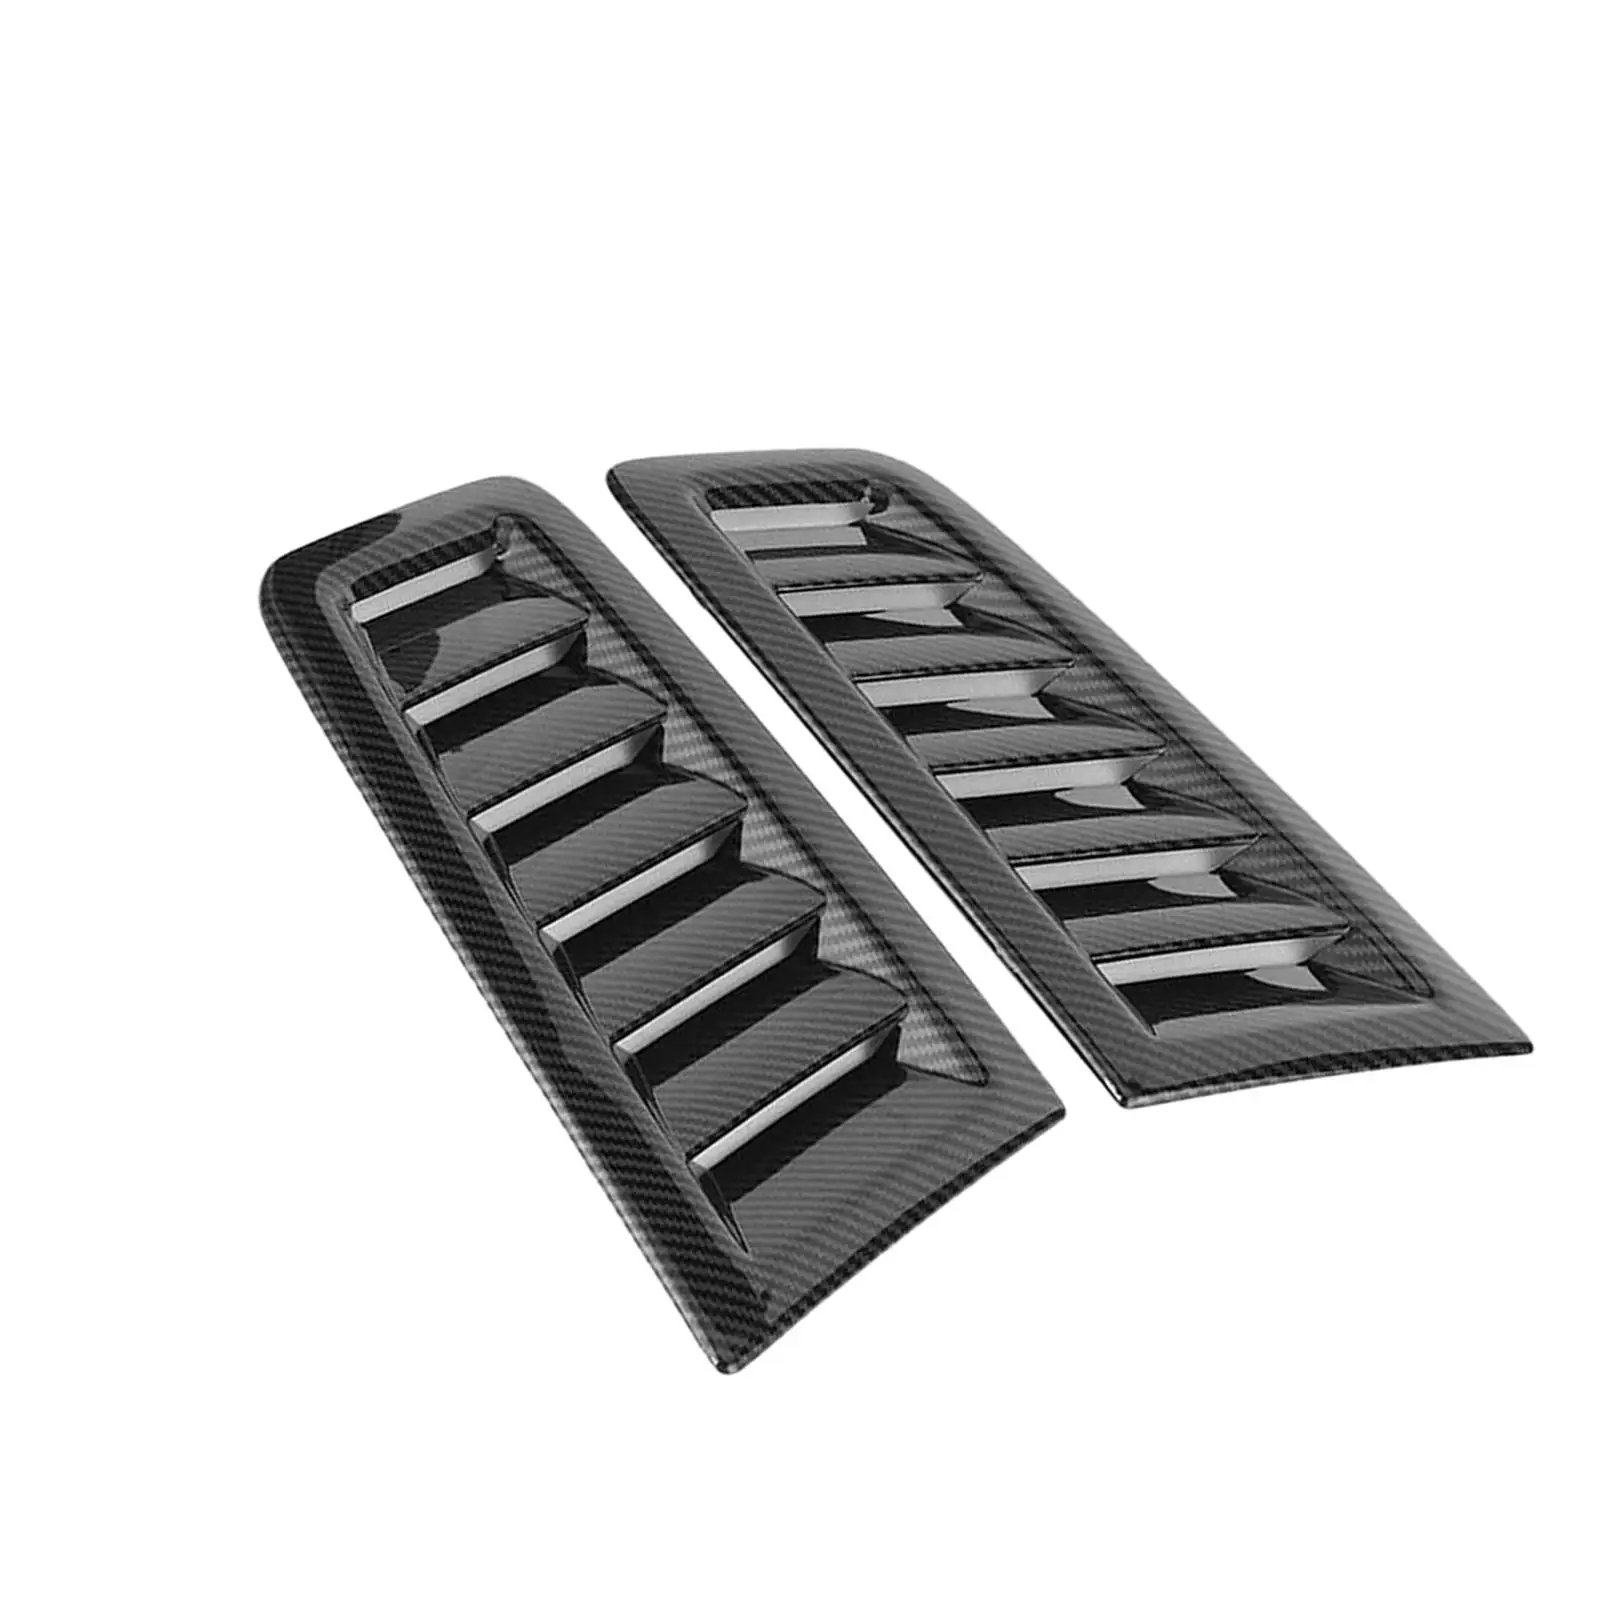 2Pcs Car Hood Vent Scoops Replace Parts Modified Accessory Air Flow Intake Hoods